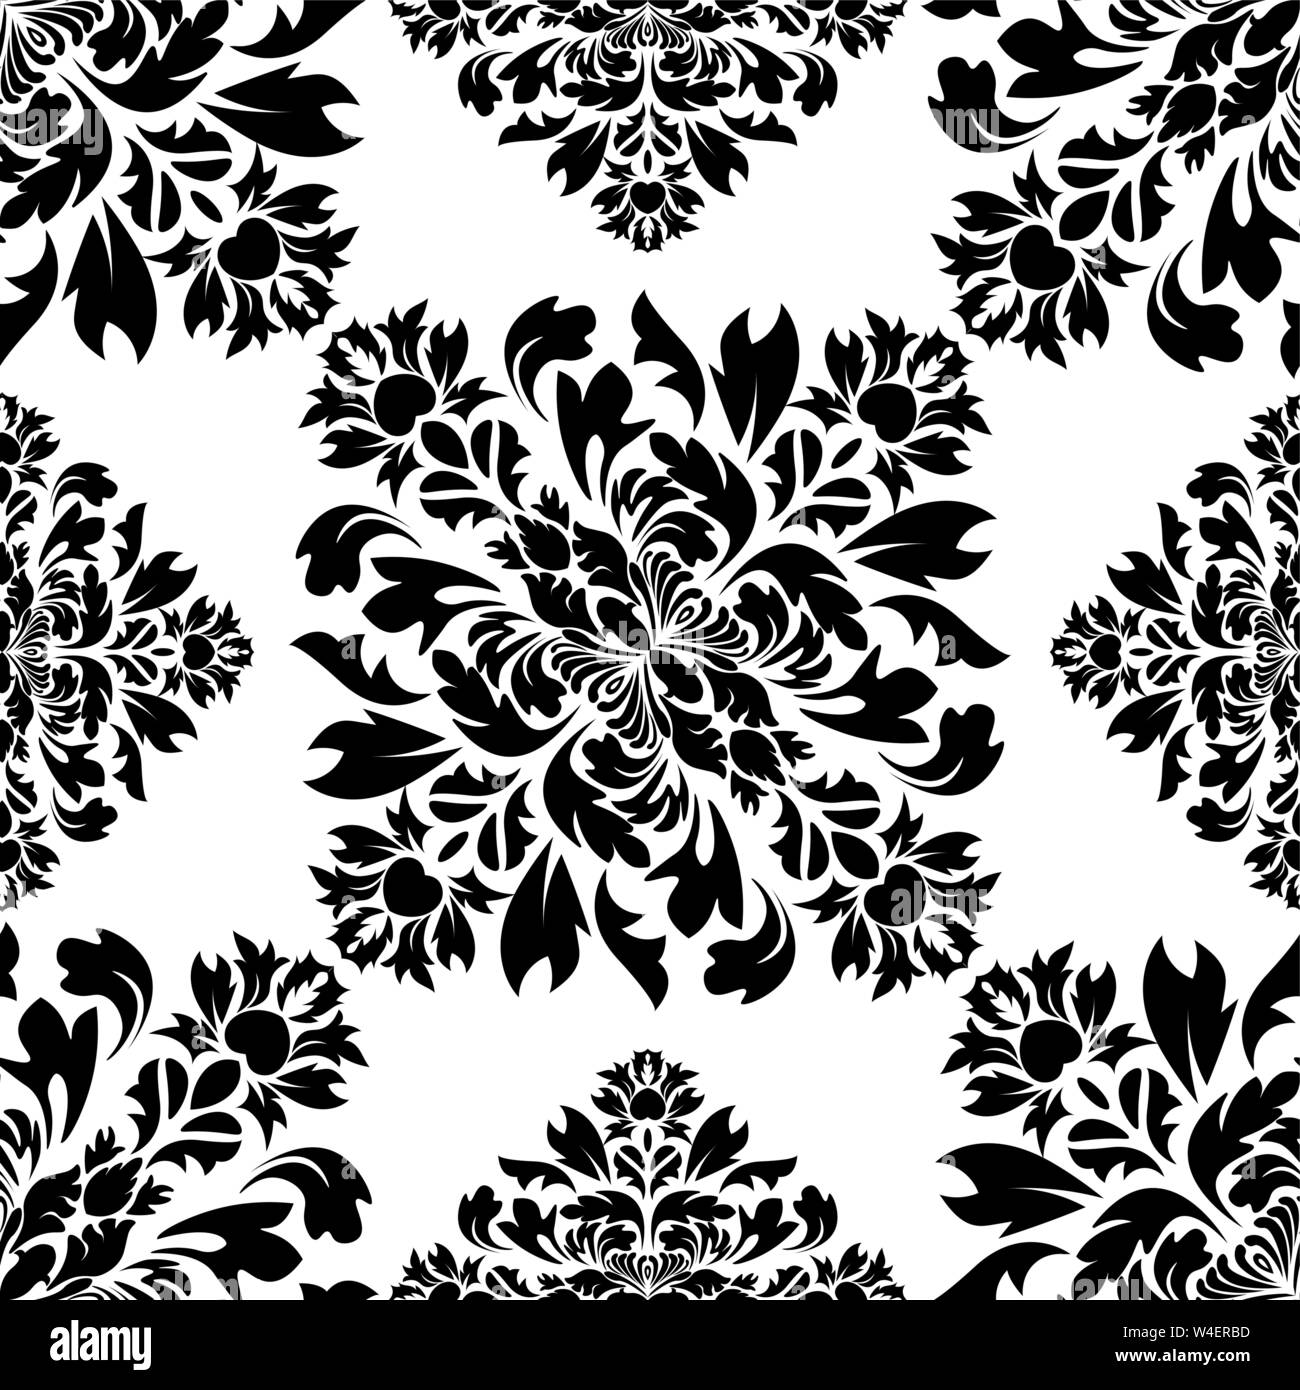 Vintage damask pattern, great design for any purposes. Indian paisley ...